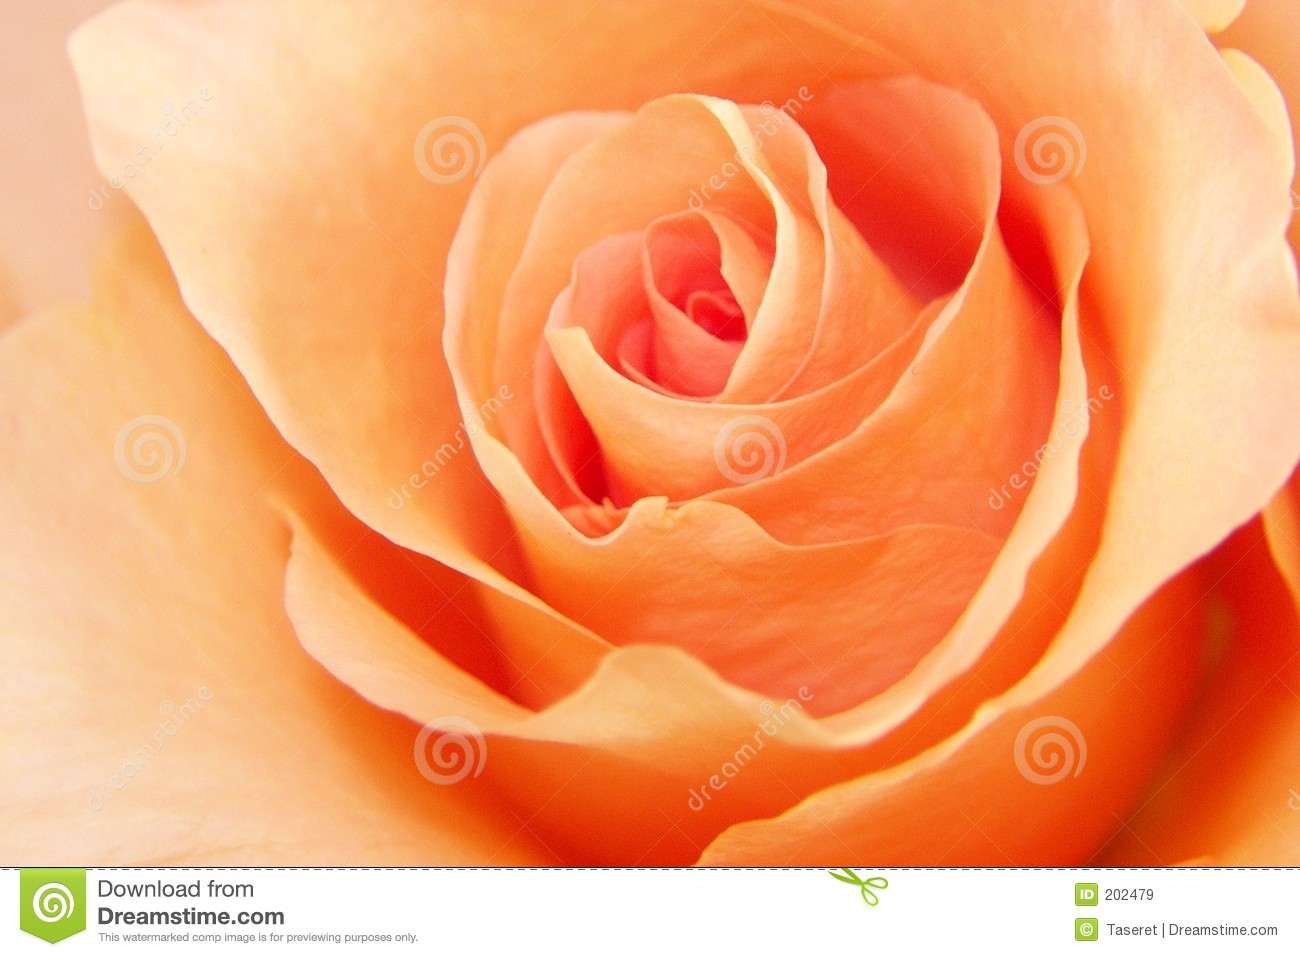 Peach Rose Love Royalty Free Stock Images   Image  202479